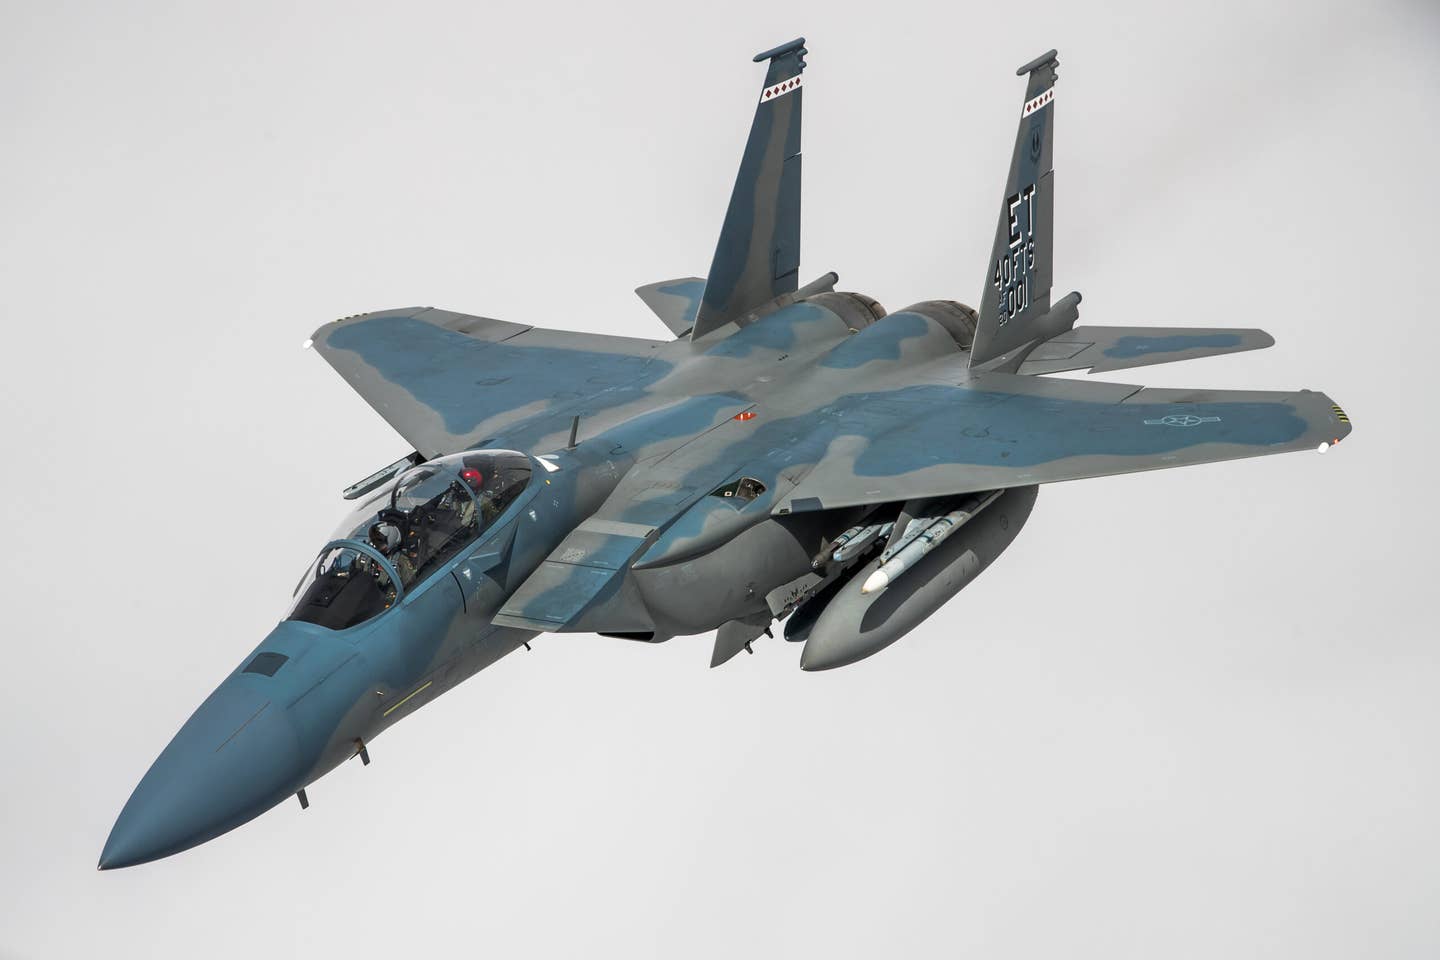 An F-15EX Eagle II from the 40th Flight Test Squadron, 96th Test Wing out of Eglin Air Force Base, Florida, flies in formation during an aerial refueling operation above the skies of Northern California, May 14. The Eagle II participated in the Northern Edge 21 exercise in Alaska earlier in May. <em>Air Force photo by Ethan Wagner</em>